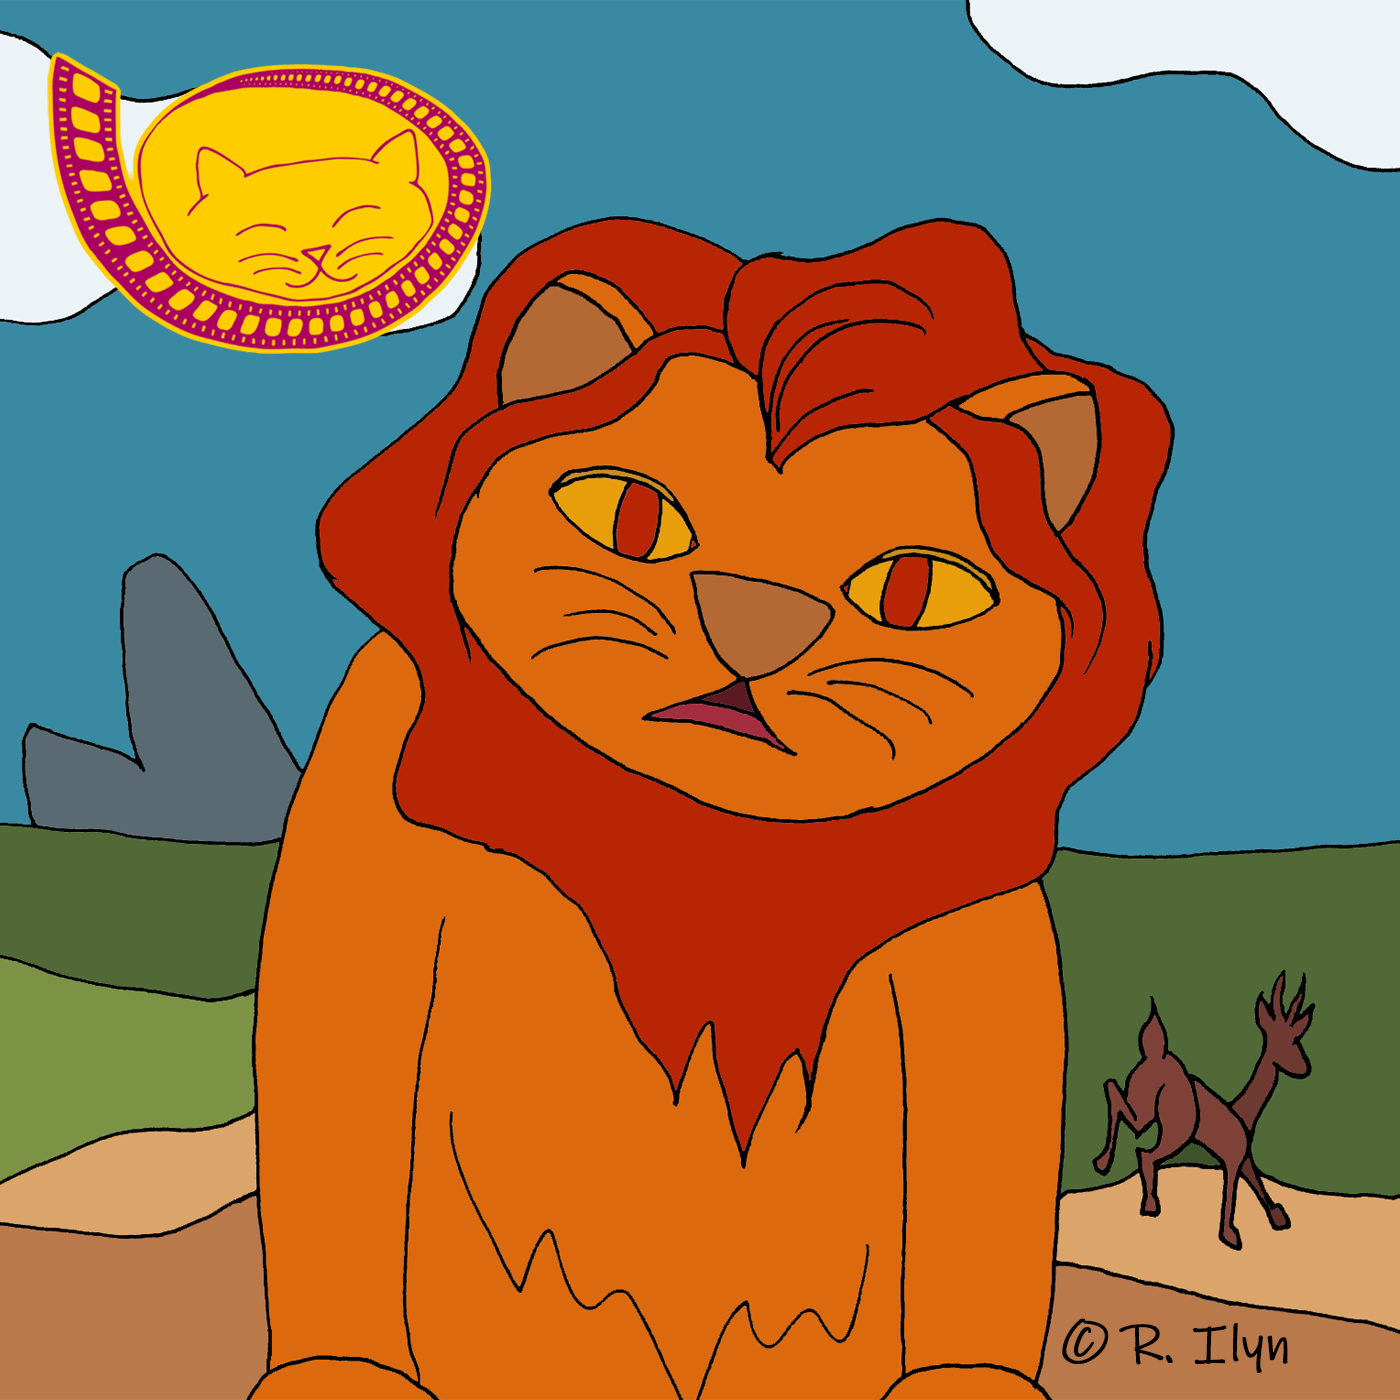 Illustration of Lion King Mufasa from the movie 